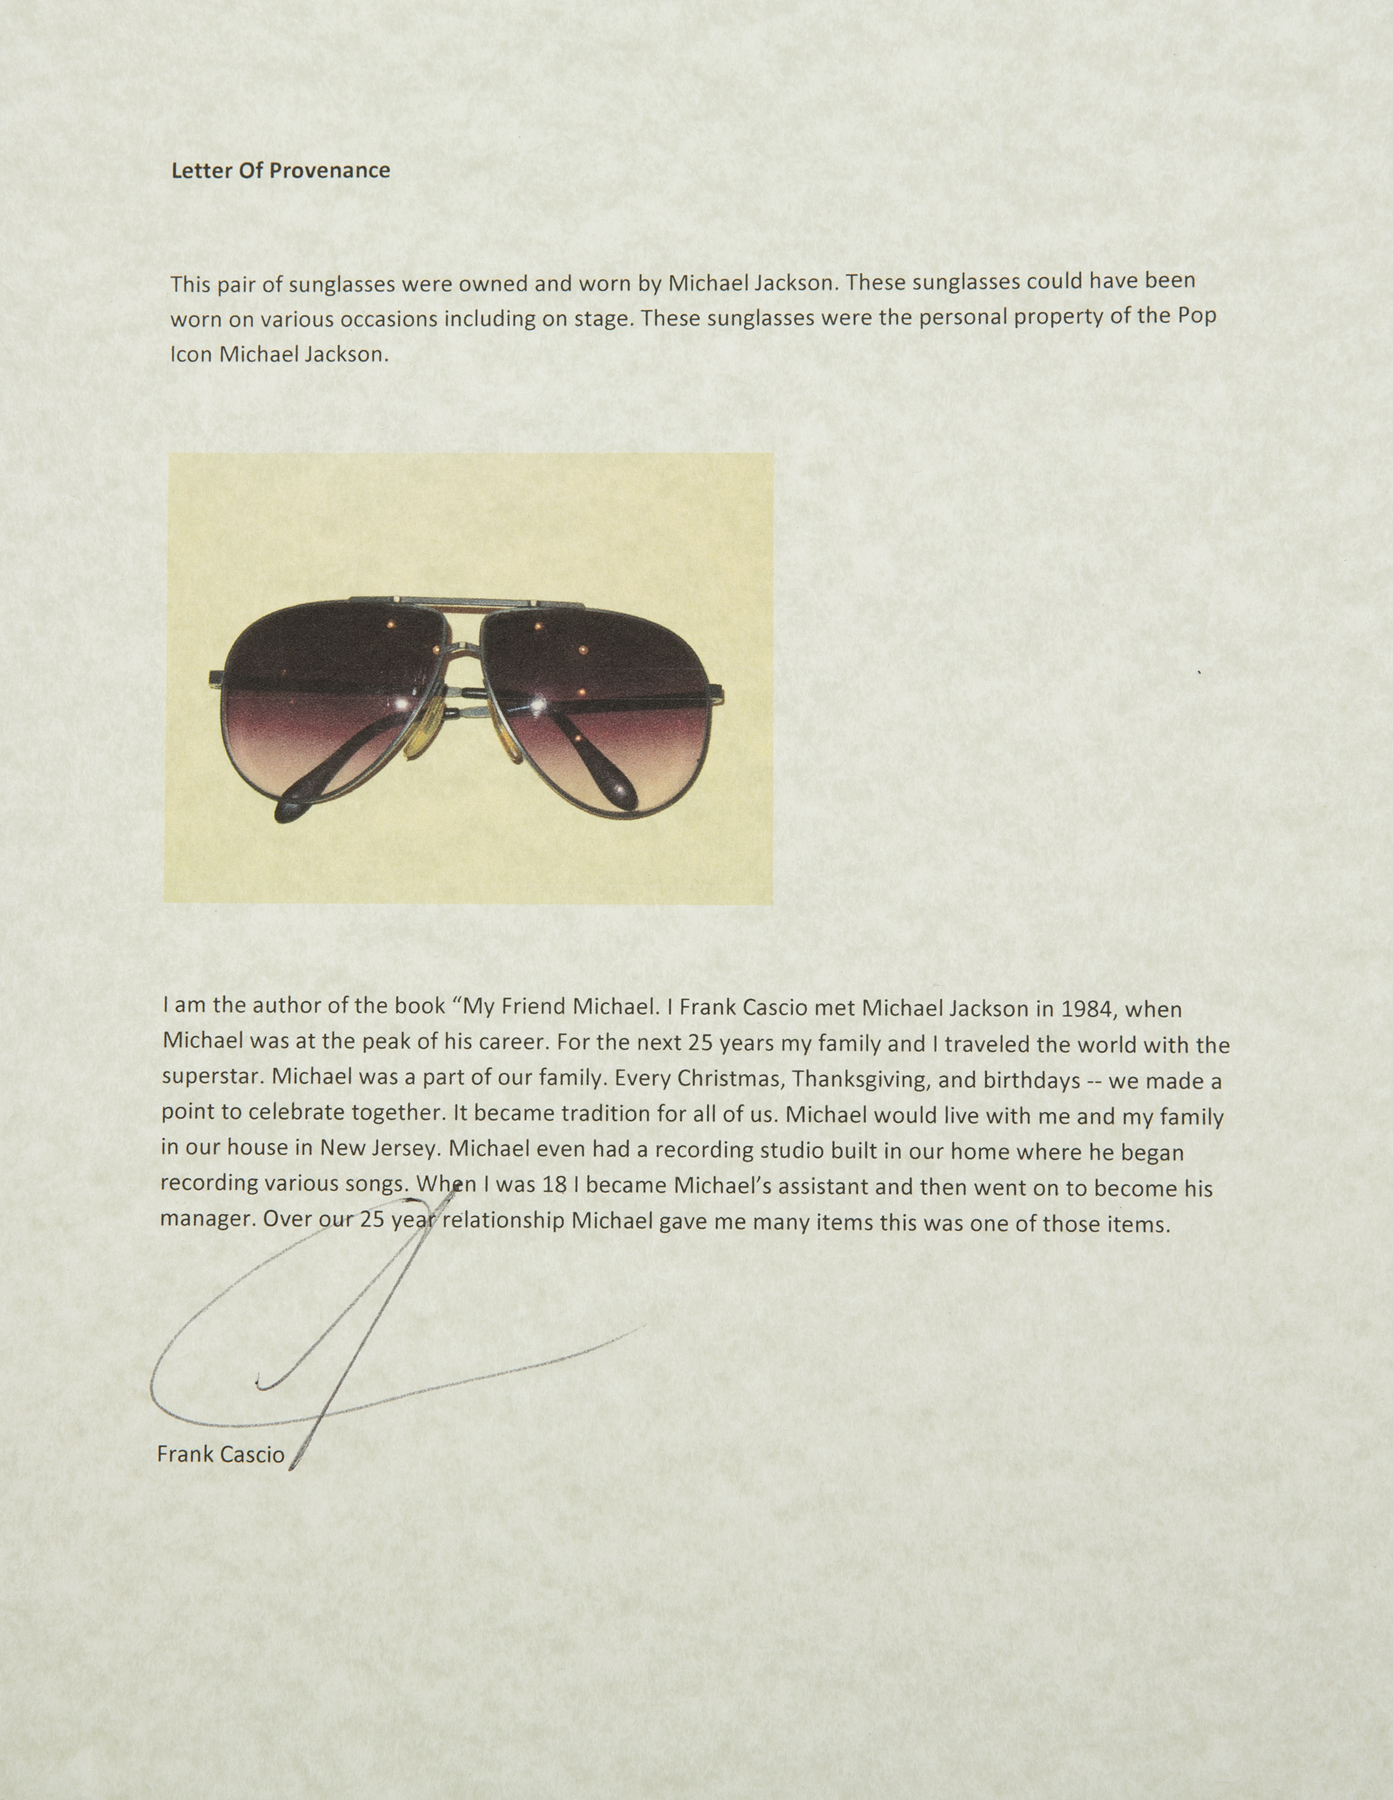 MICHAEL JACKSON AVIATOR SUNGLASSES A pair of aviator sunglasses owned and believed to have been worn - Image 2 of 2